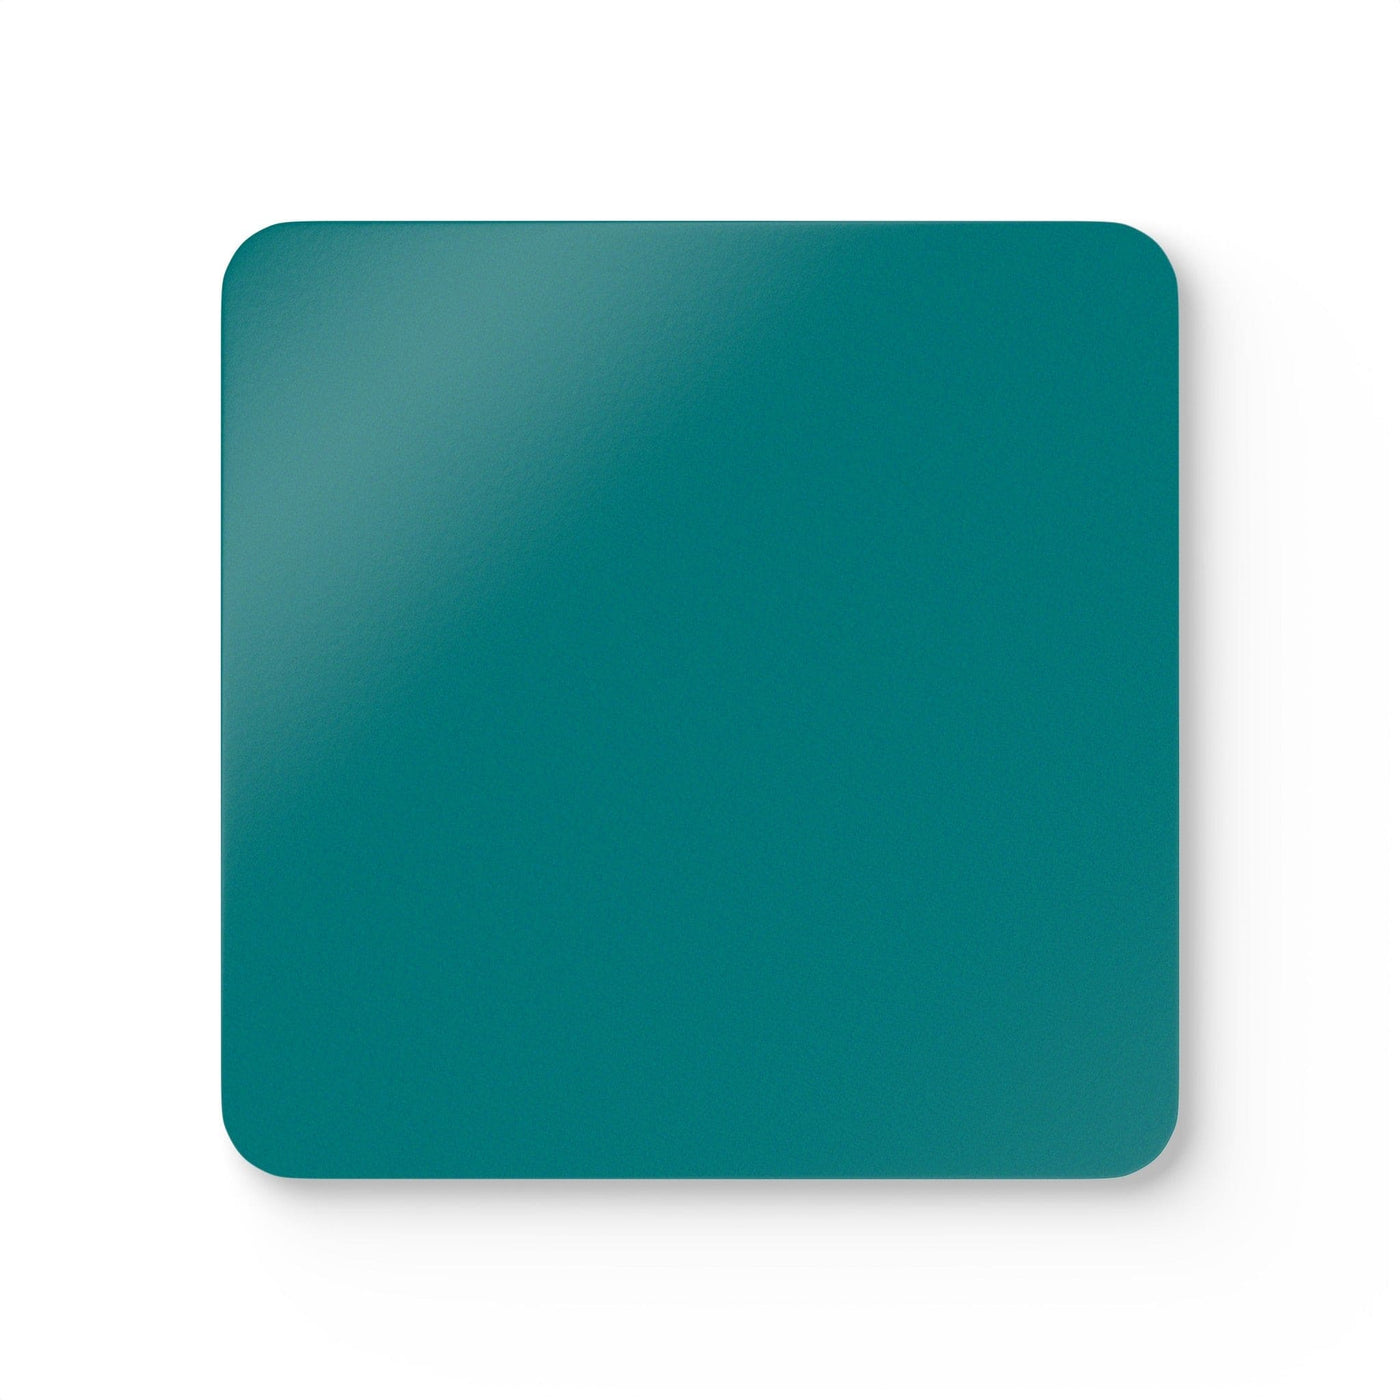 Handcrafted Square Coaster Set Of 4 Dark Teal Green - Home Decor